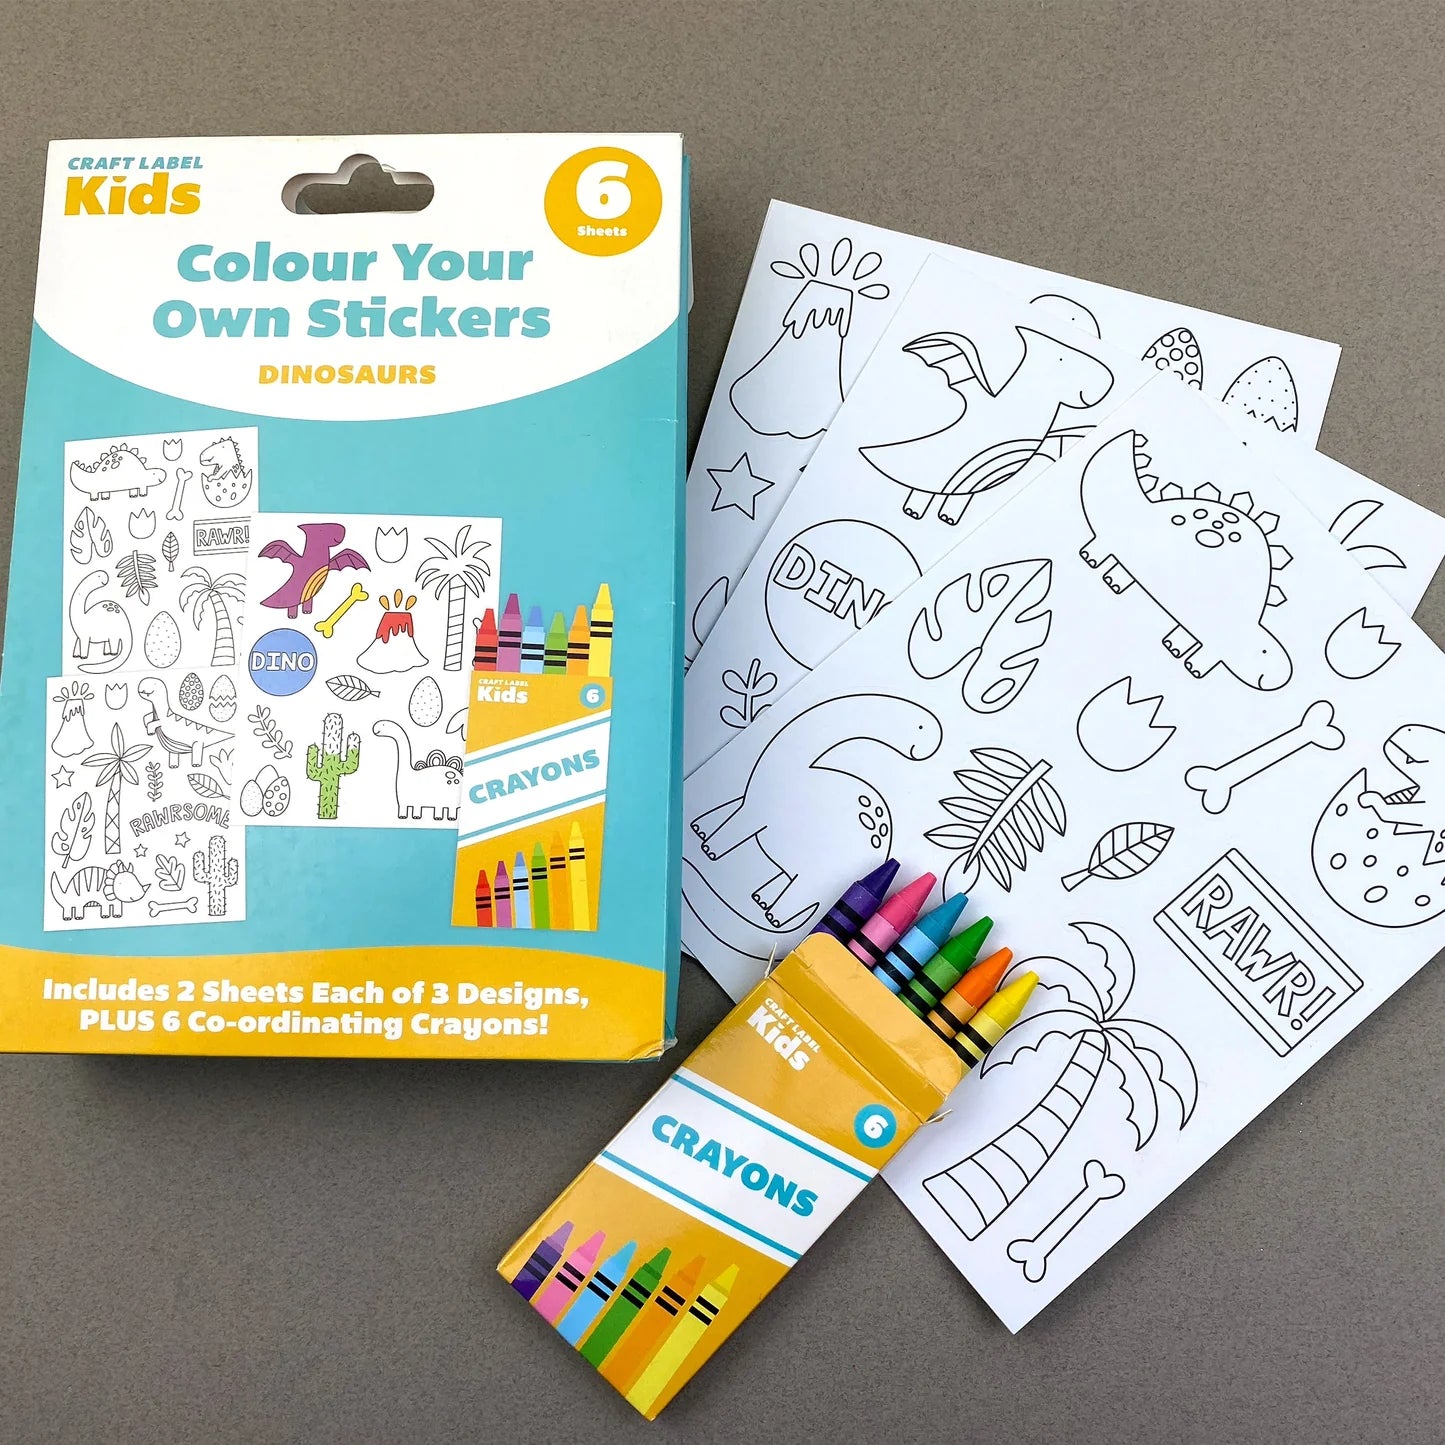 Colour Your Own Stickers - Dinosaurs